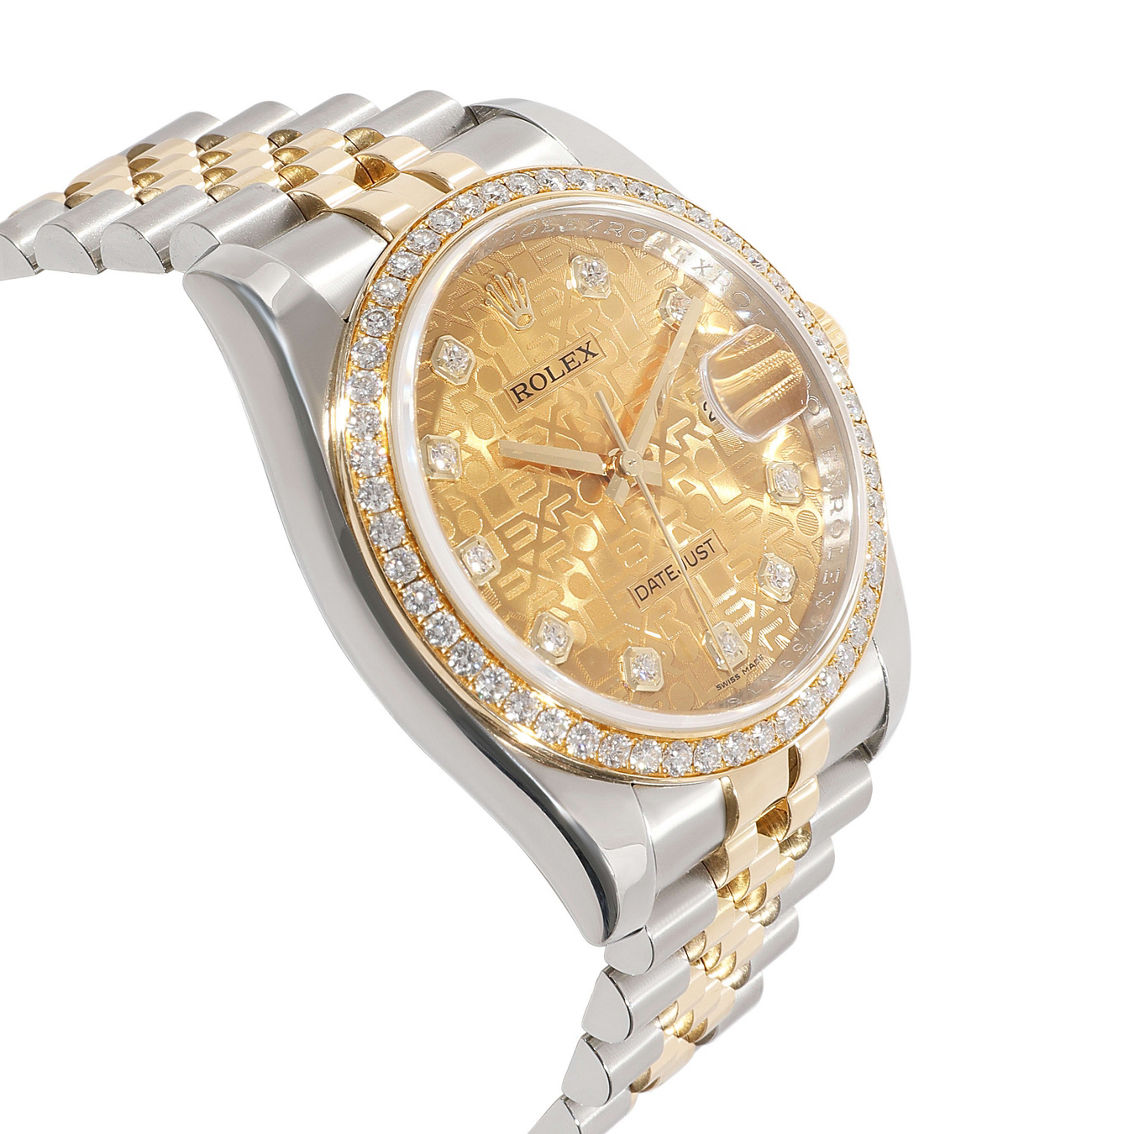 Rolex Datejust 116243 Men's Watch in  Stainless Steel/Yellow Gold Pre-Owned - Image 2 of 3